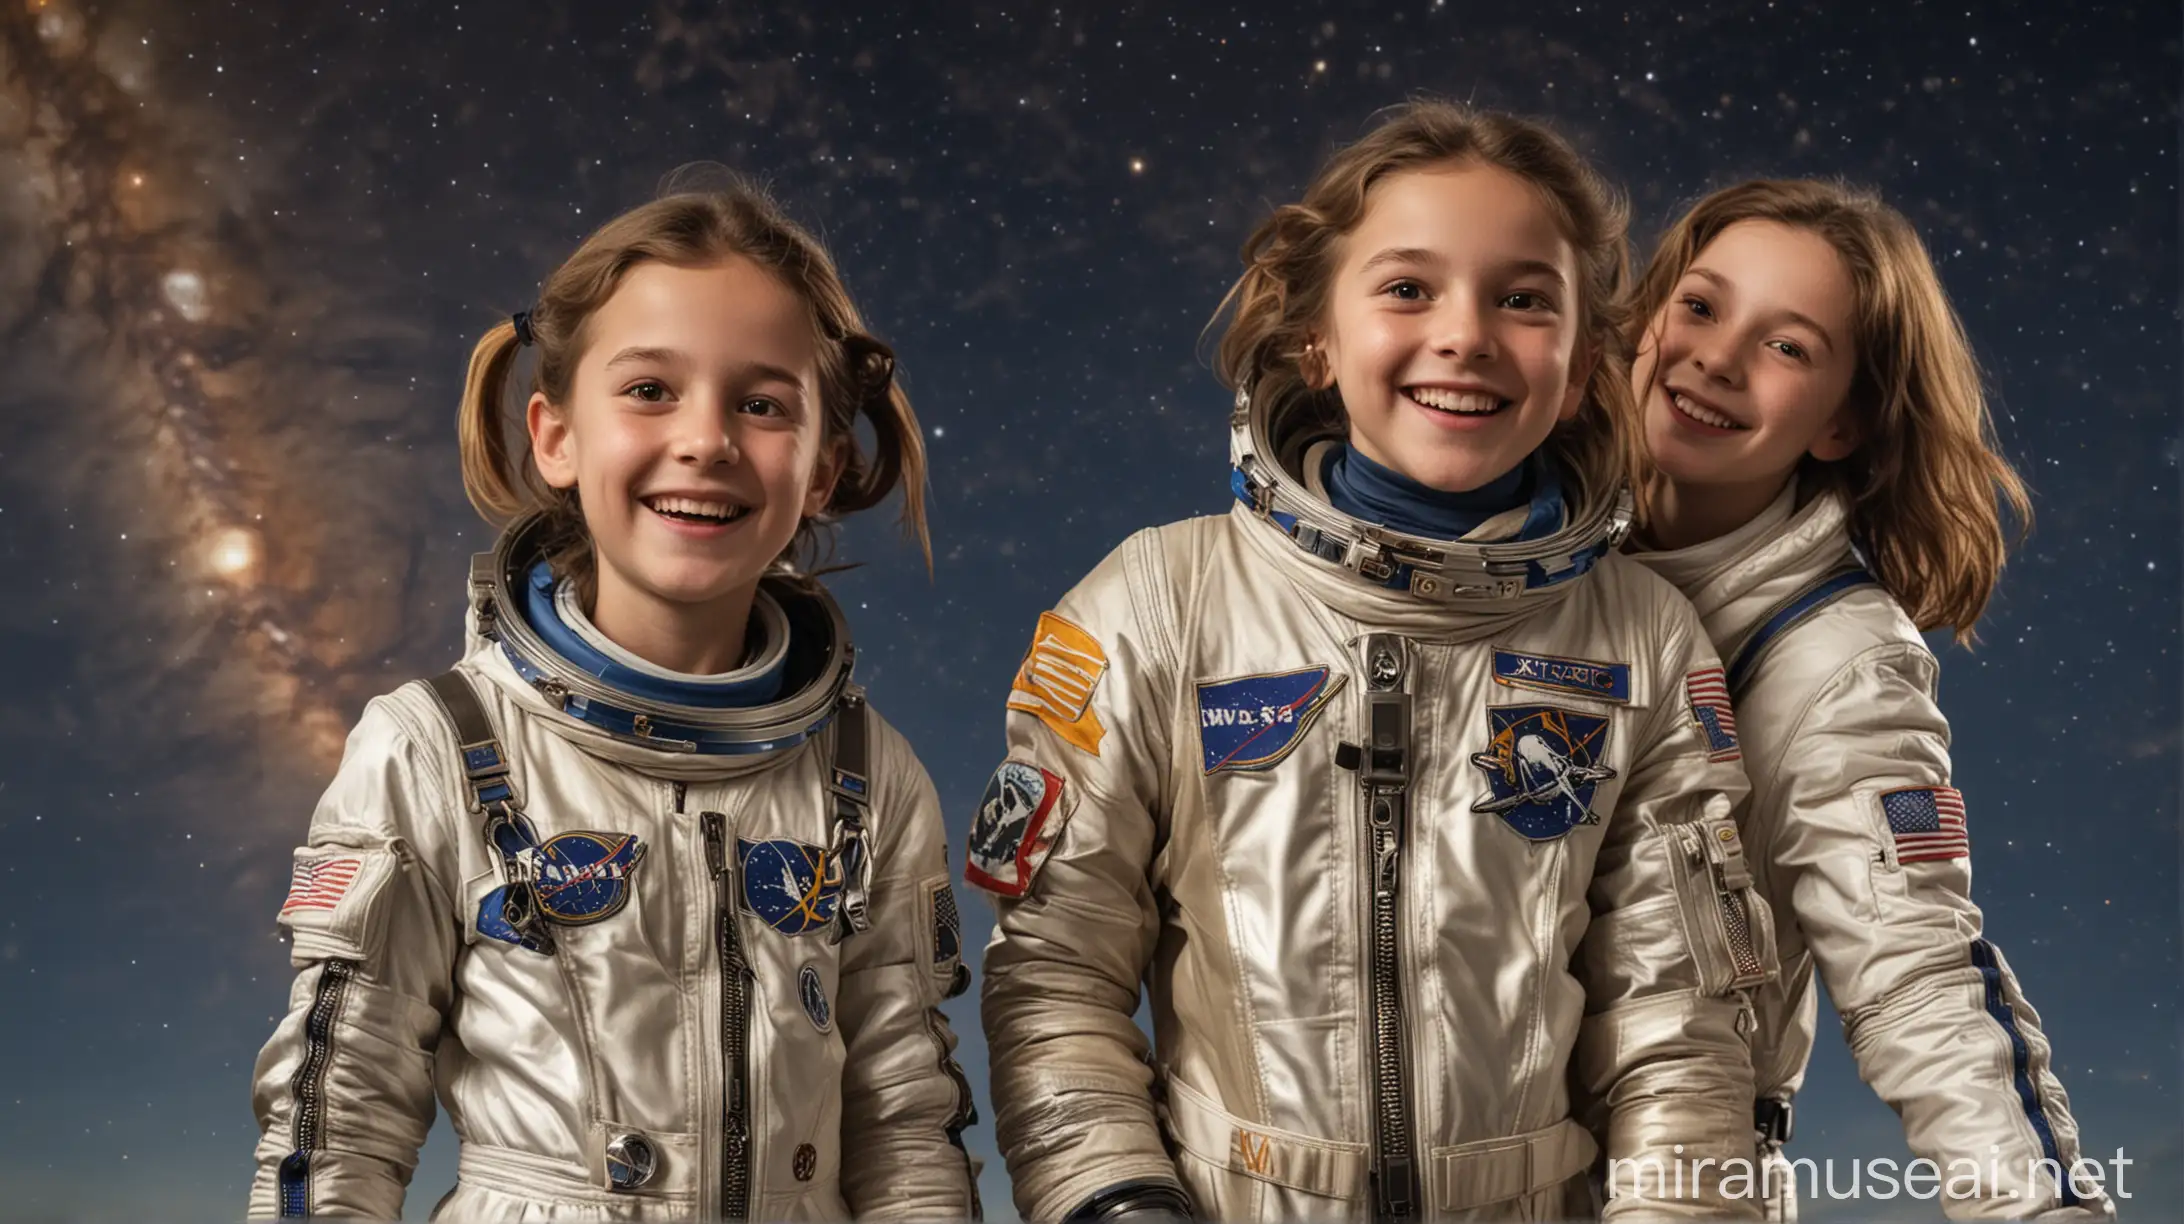 Young Astronauts in Awe Exploring Space with Joy